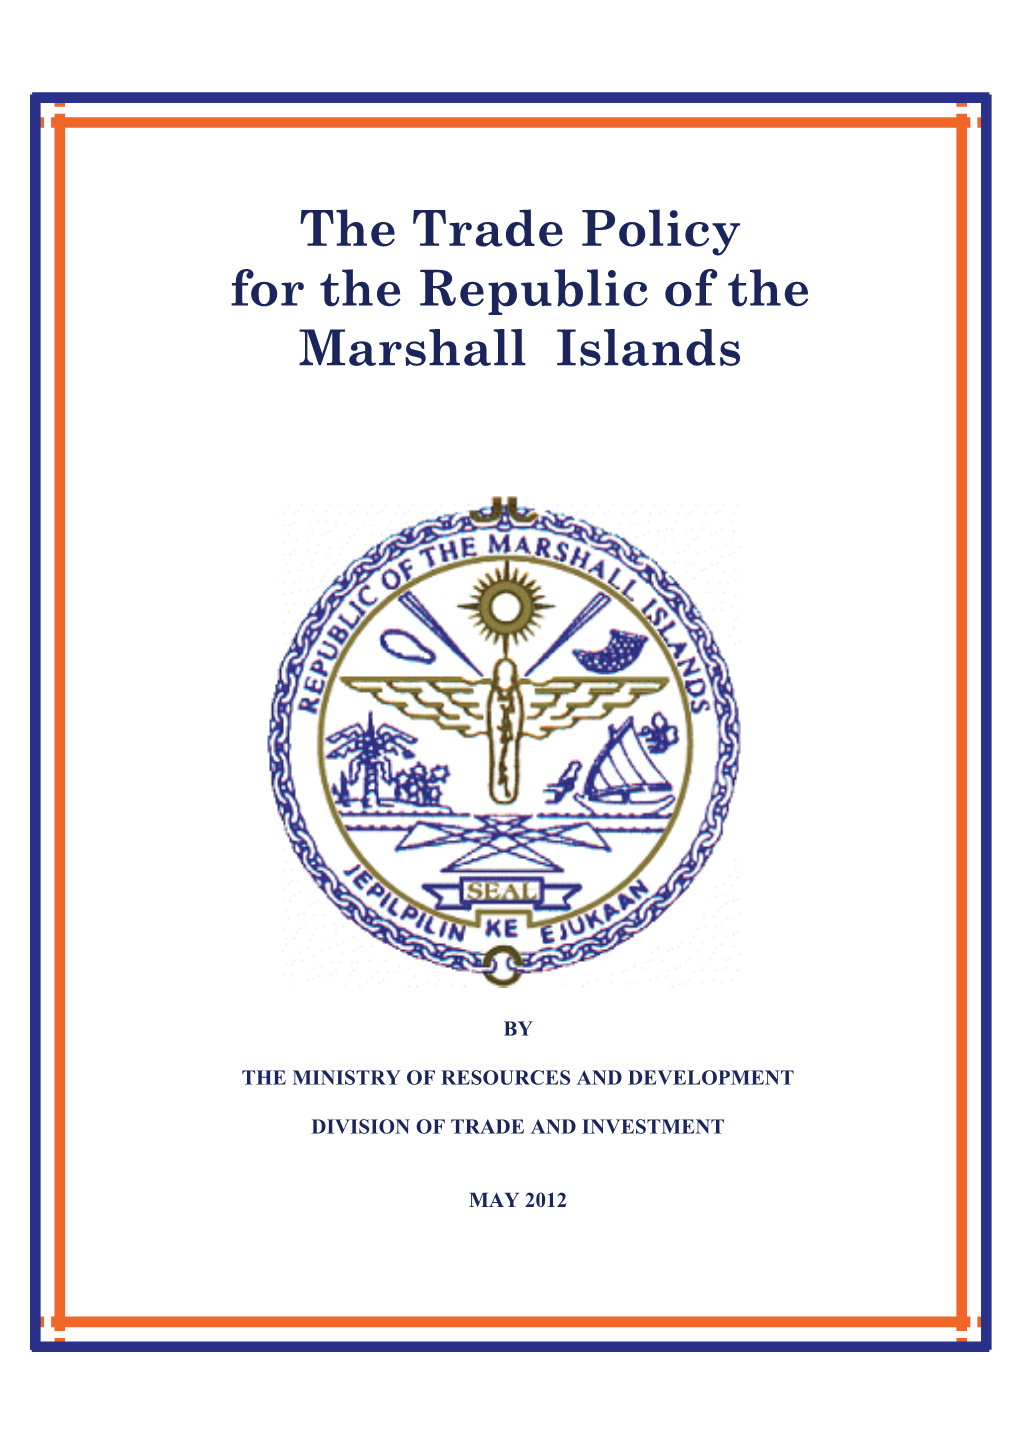 Trade Policy for the Republic of the Marshall Islands